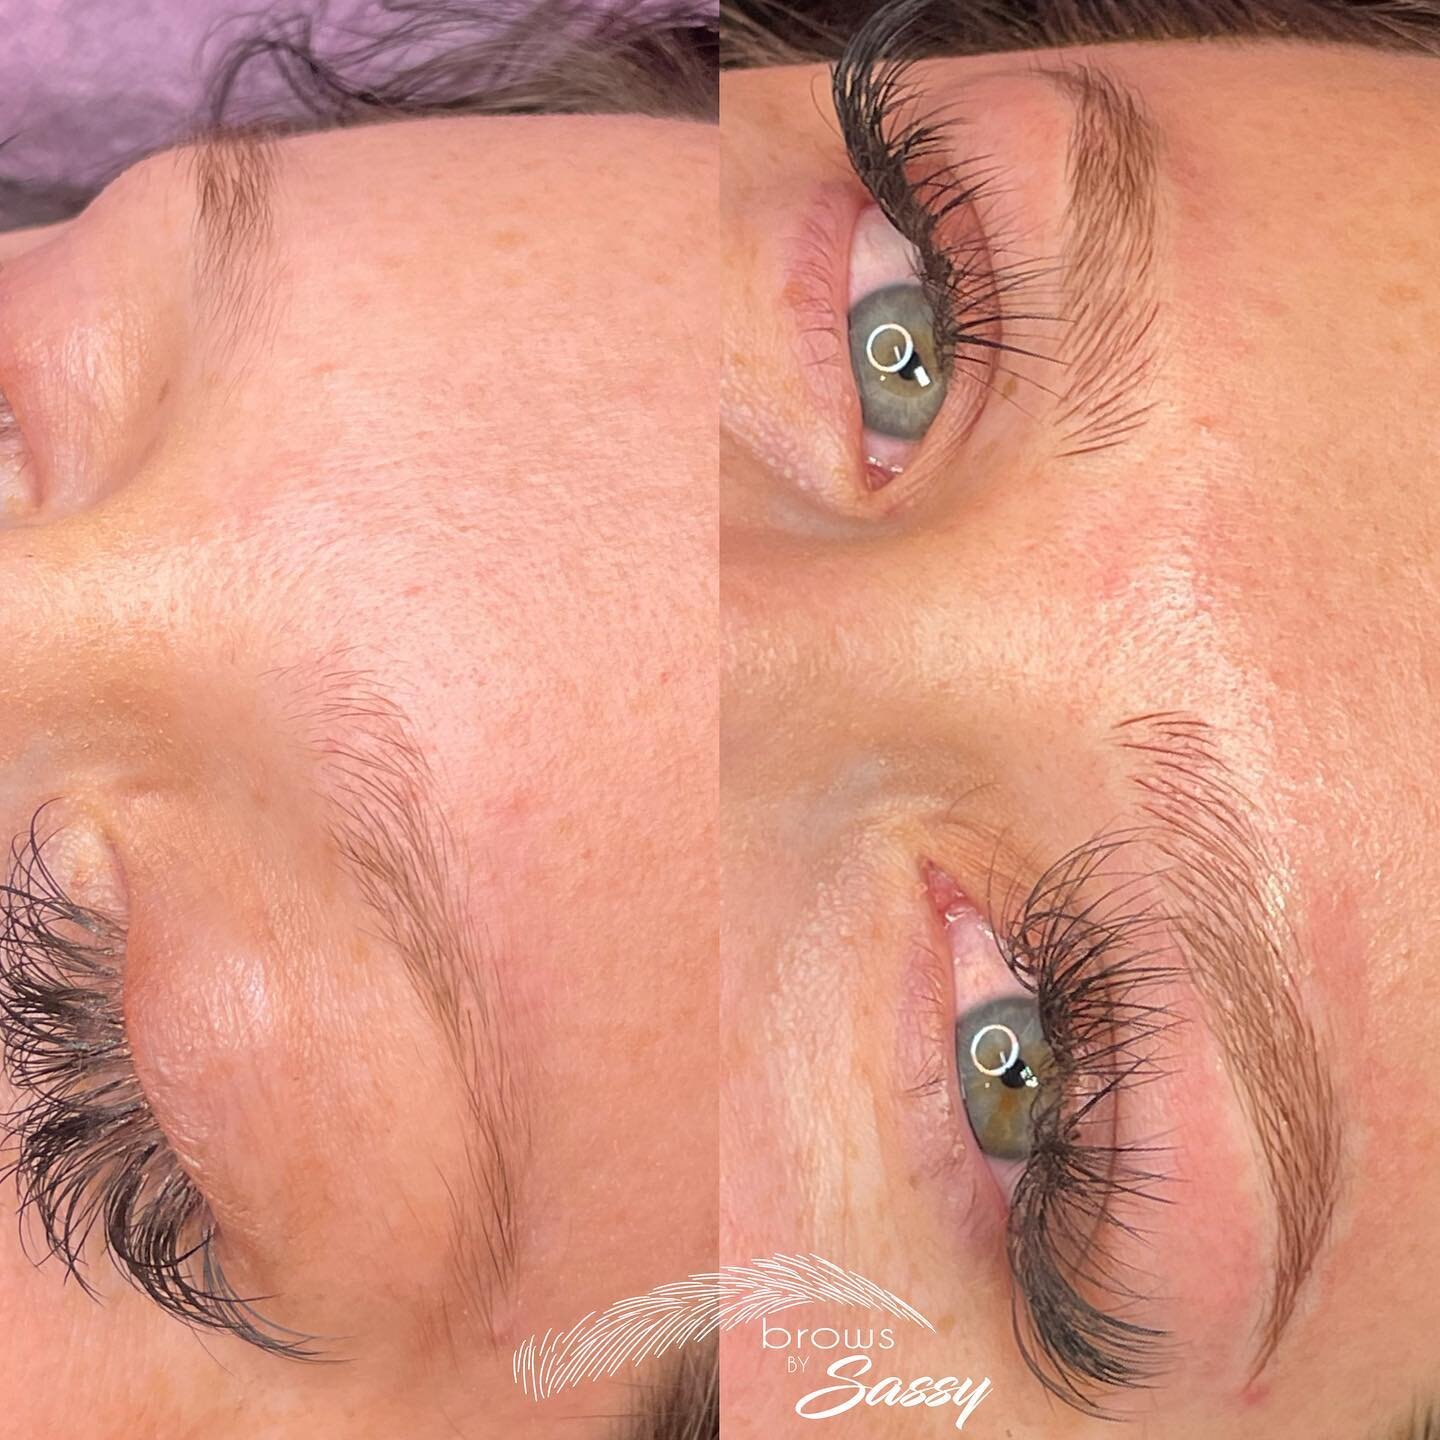 Natural and full 
Microblading  waterproof and natural looking brows! 
The procedure involves tiny strokes that build a texture that looks like your own eyebrow hair. Microblading results can last 12-18 months depending on skin type and aftercare. 

